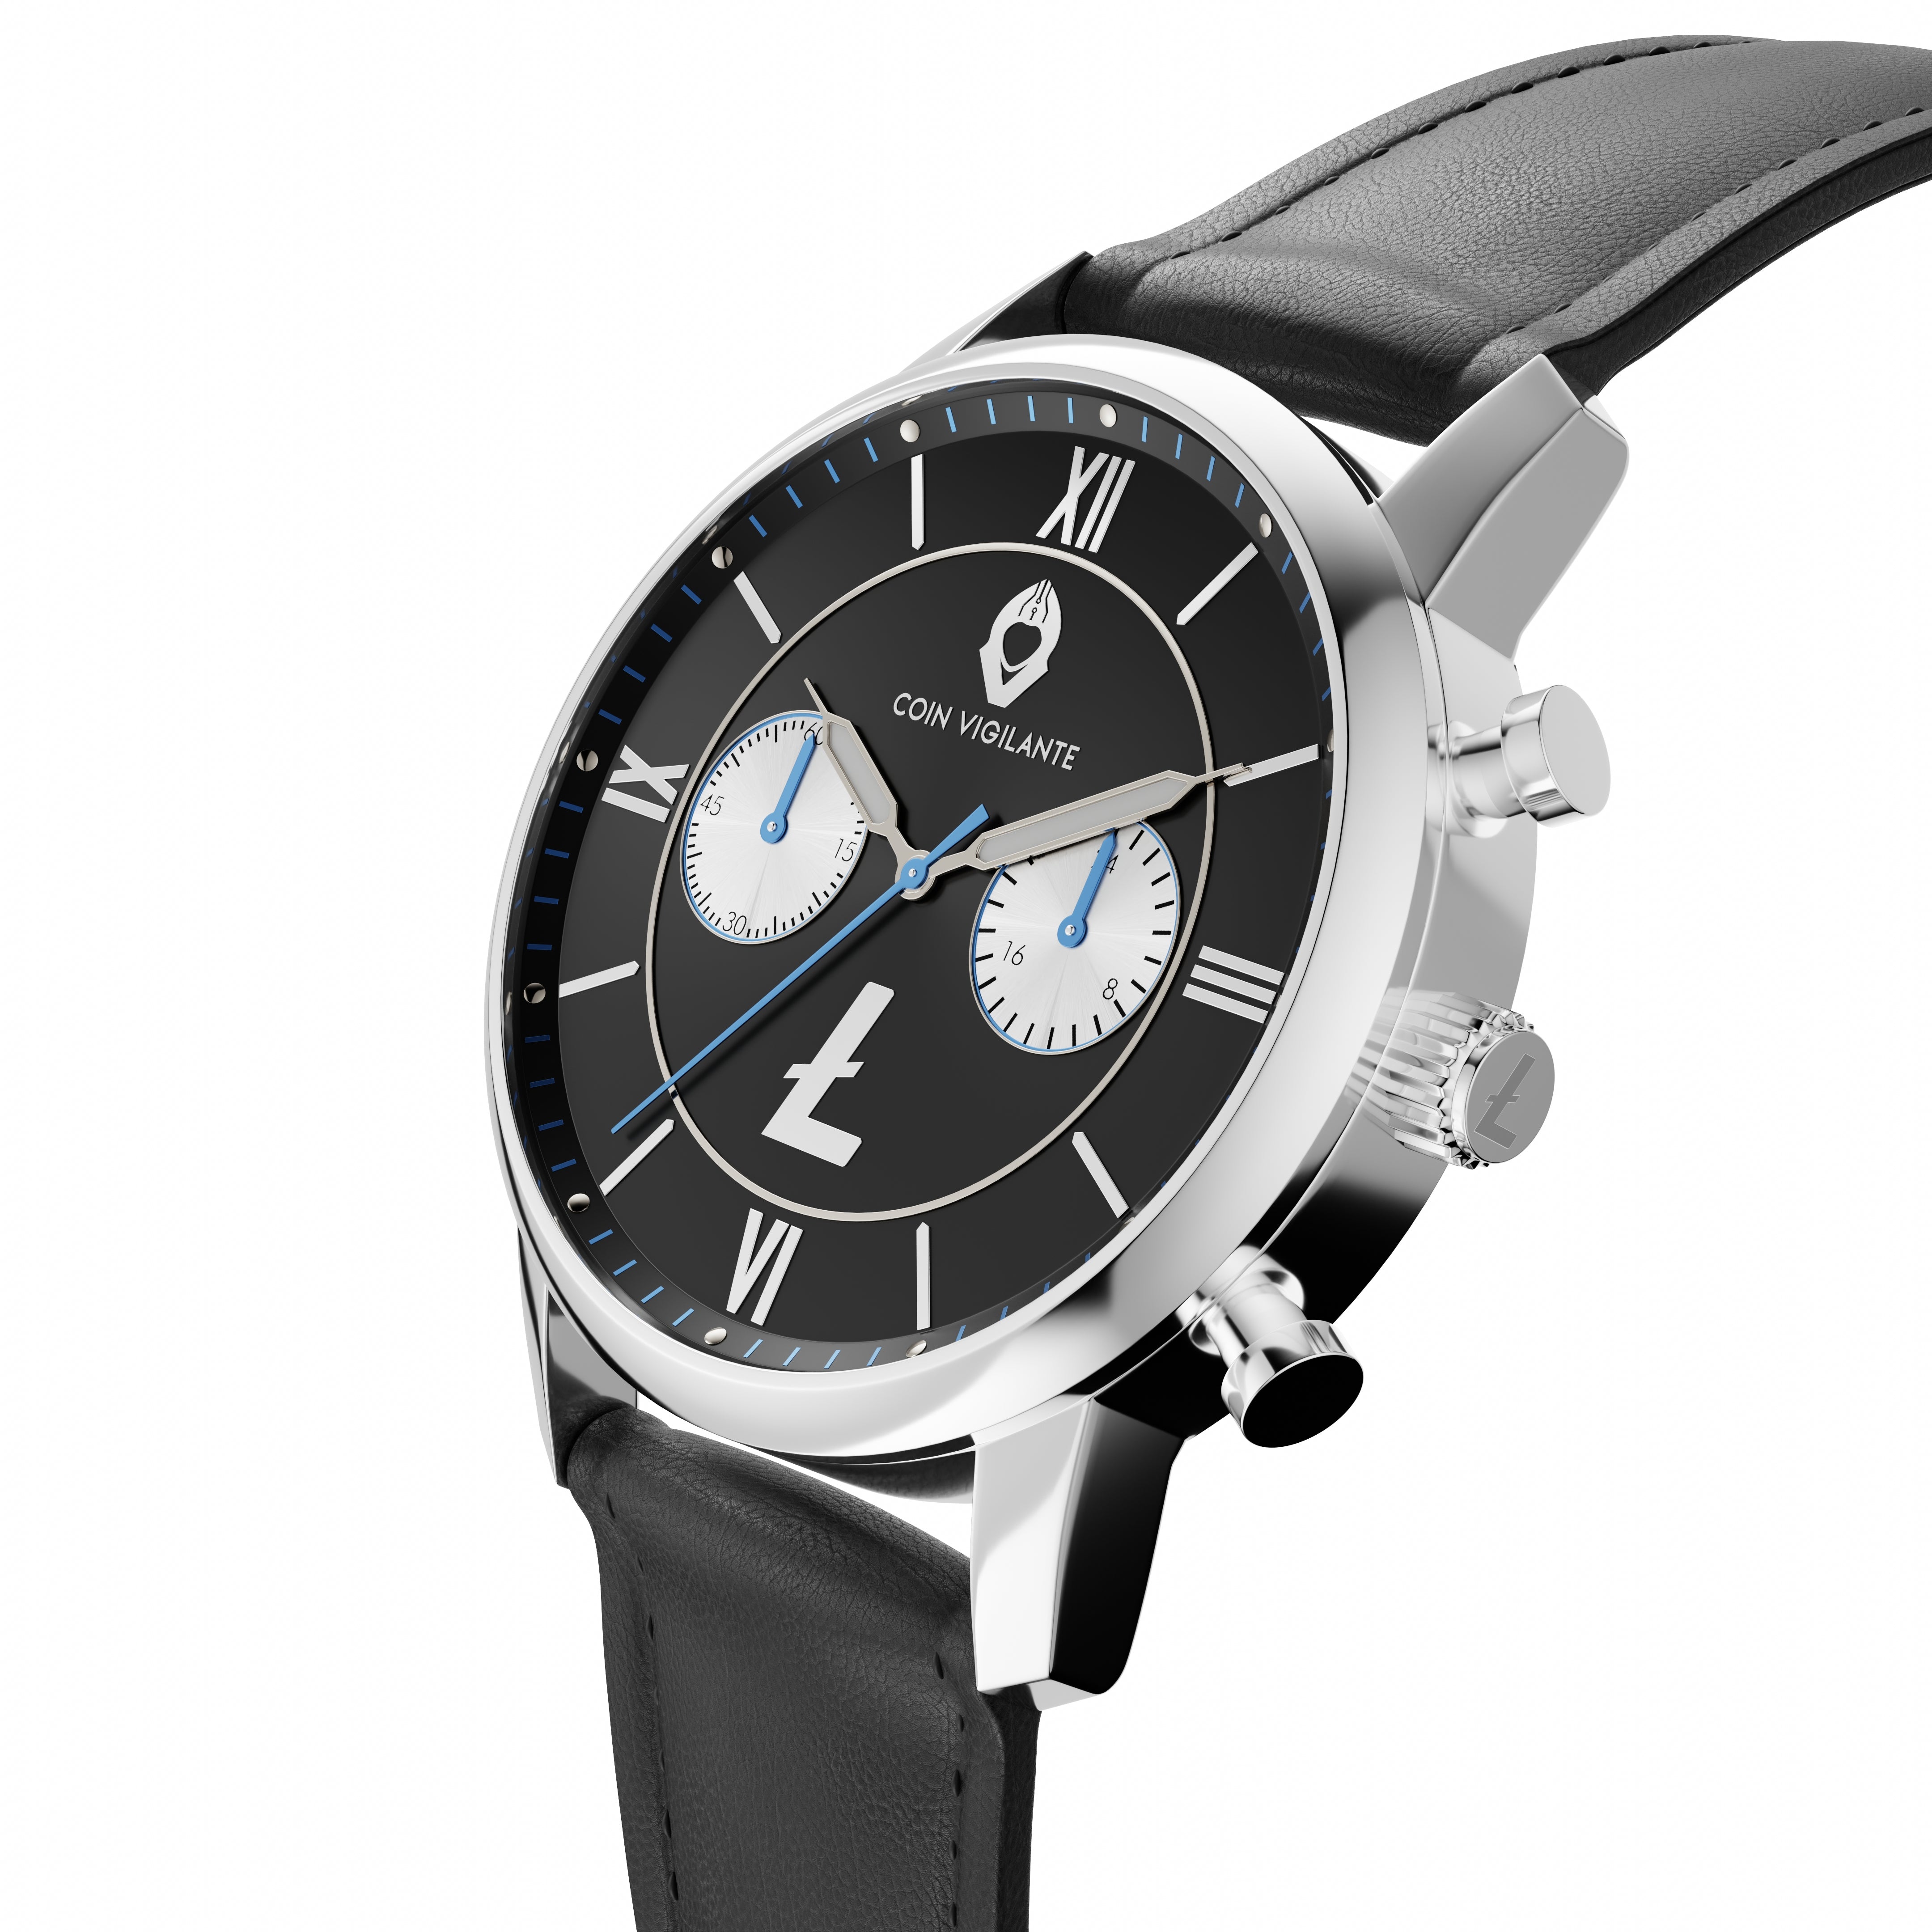 Side view of the Litecoin Watch - Model E featuring a black leather strap